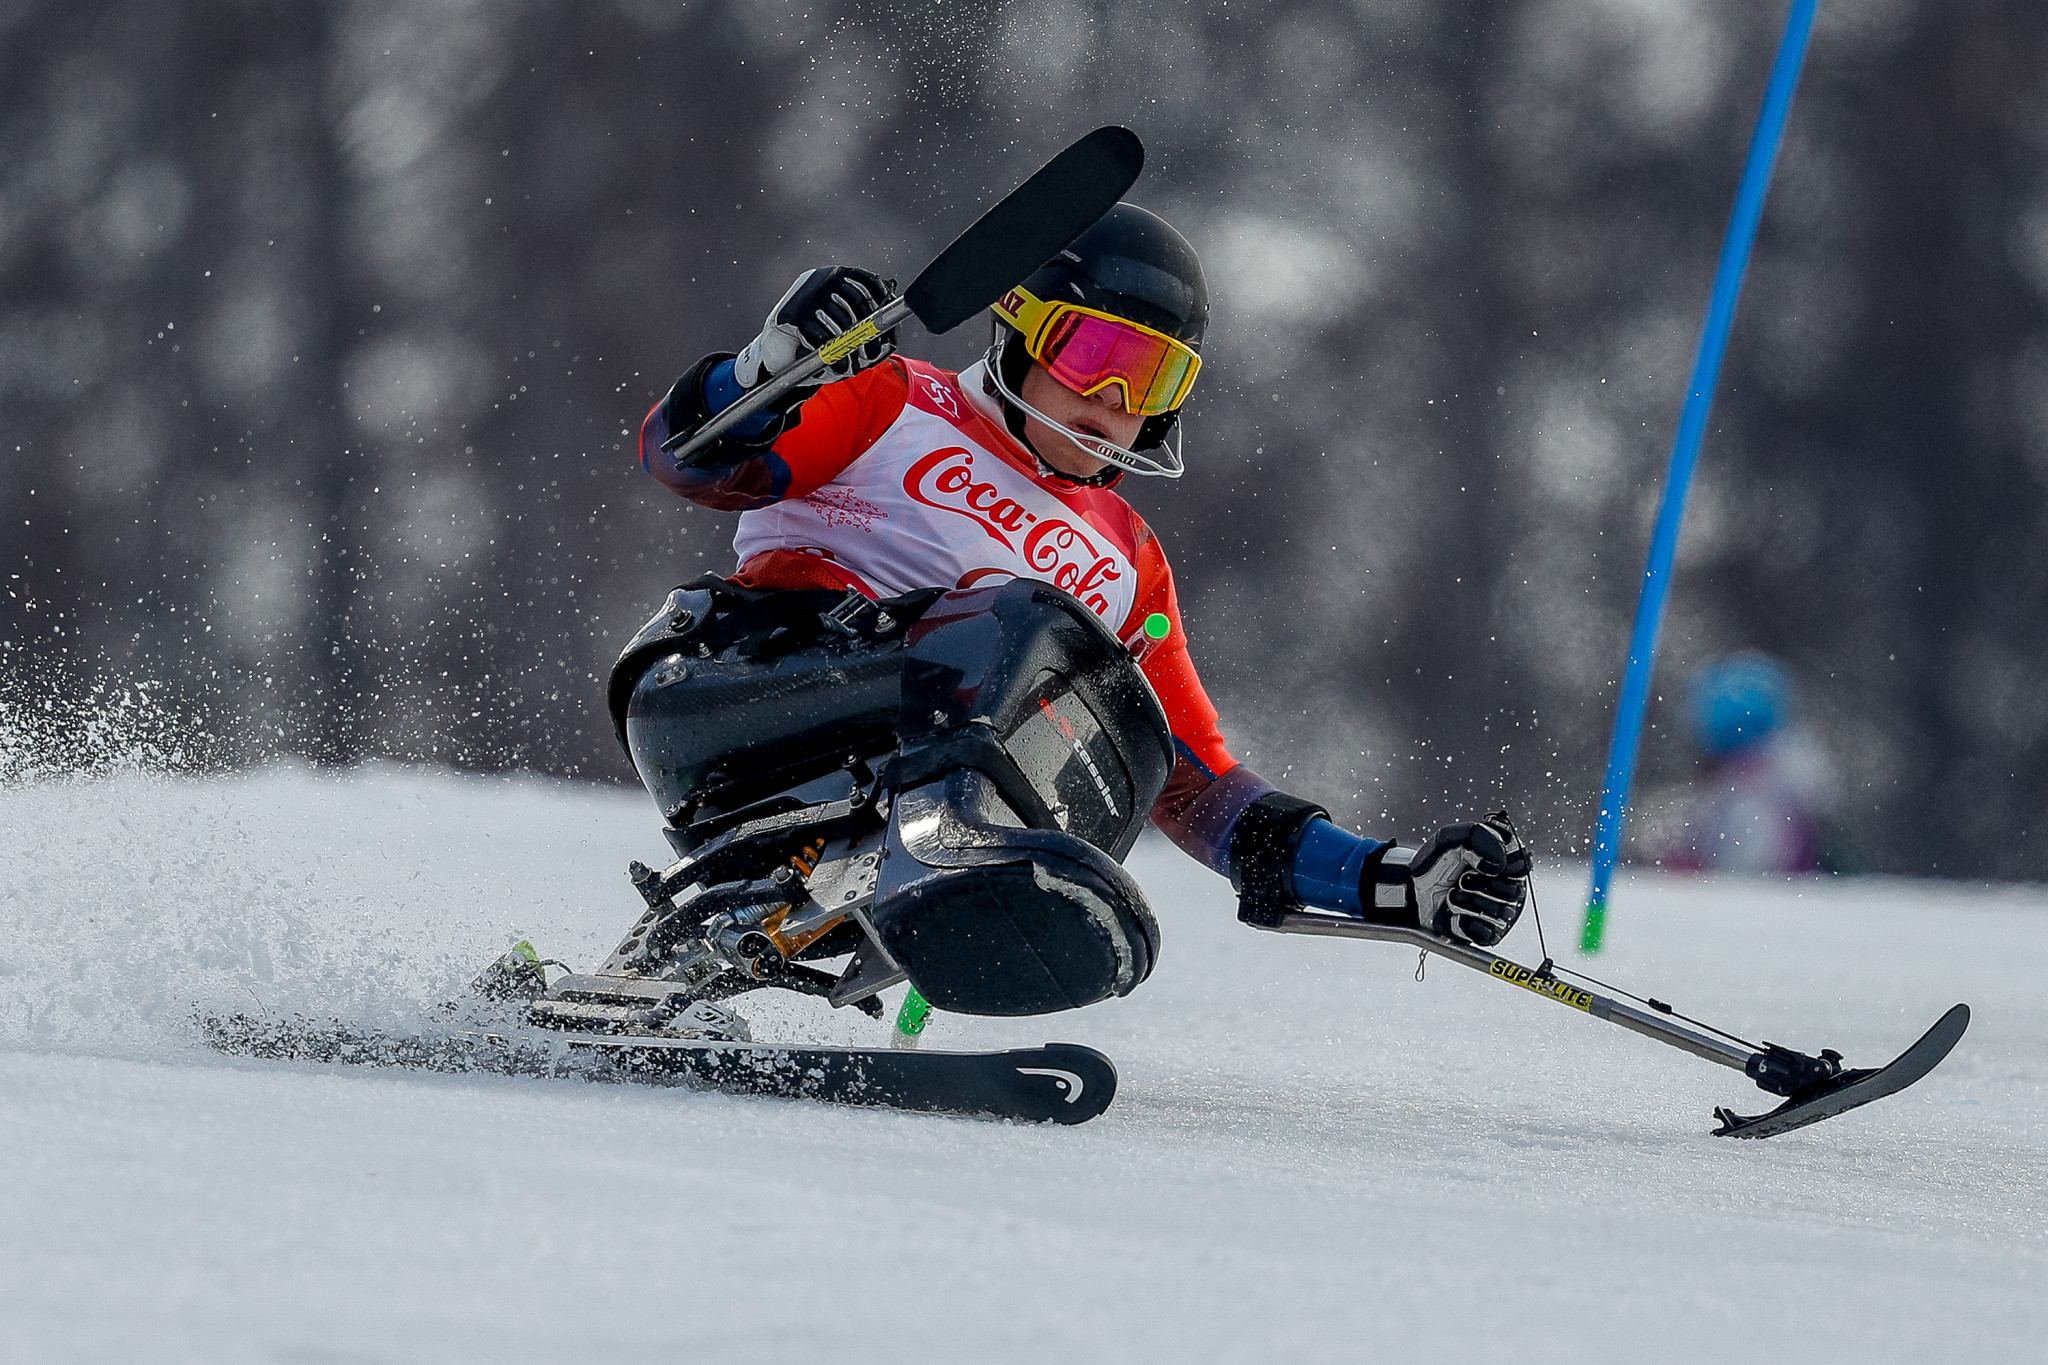 La Molina to host extended World Para Alpine Skiing World Cup after Espot cancellation 